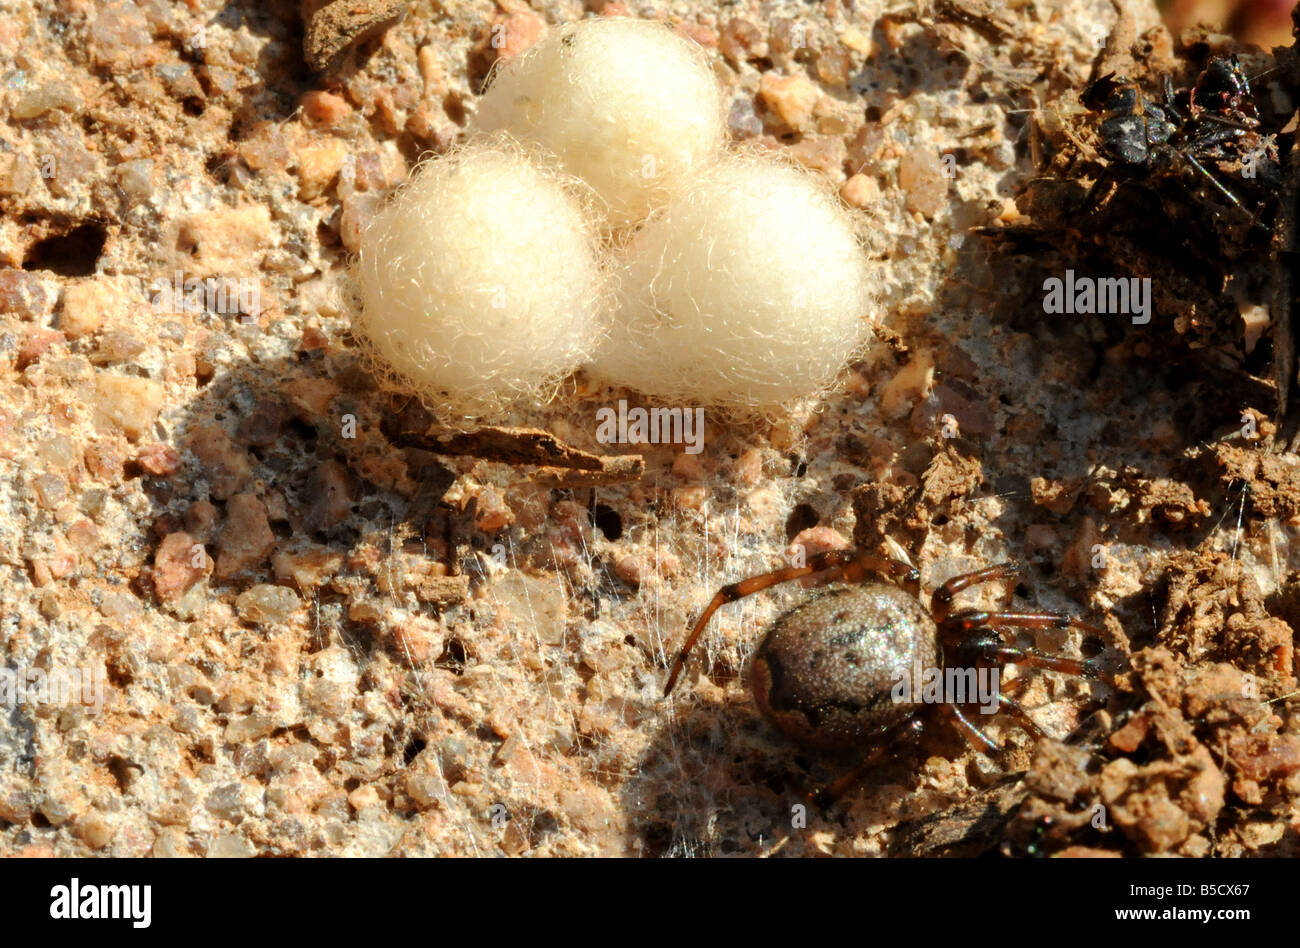 Spider with 3 Egg Cases Stock Photo